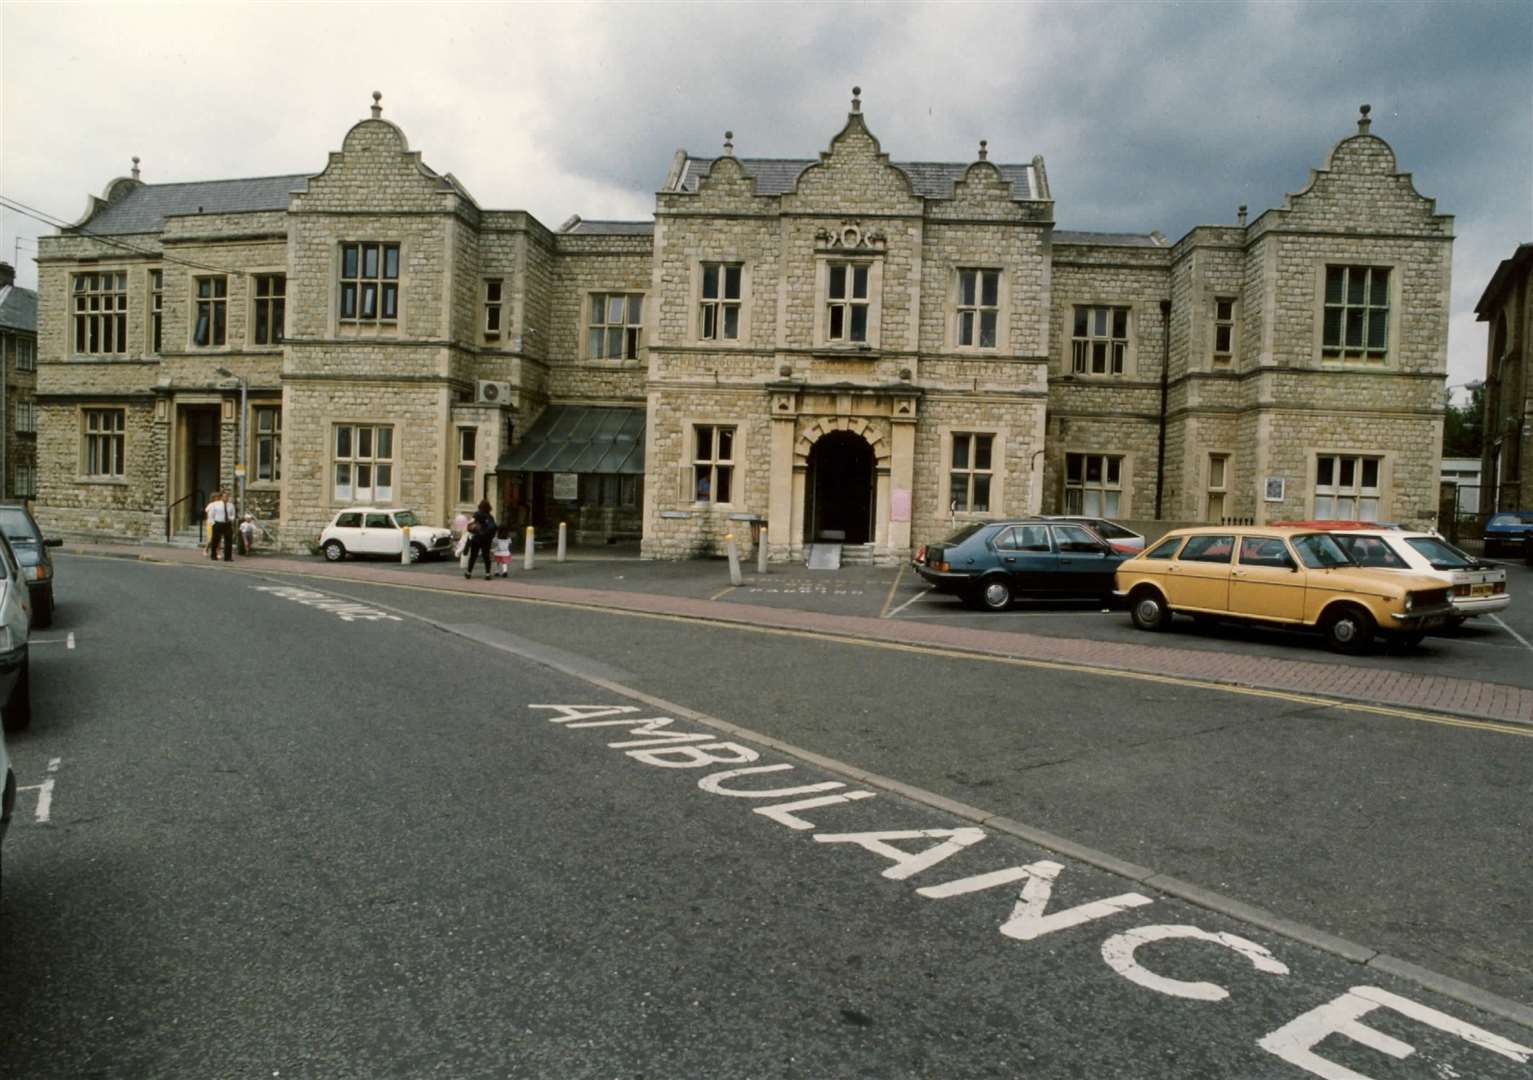 The Kent County Ophthalmic Hospital in Maidstone, pictured in July, 1992